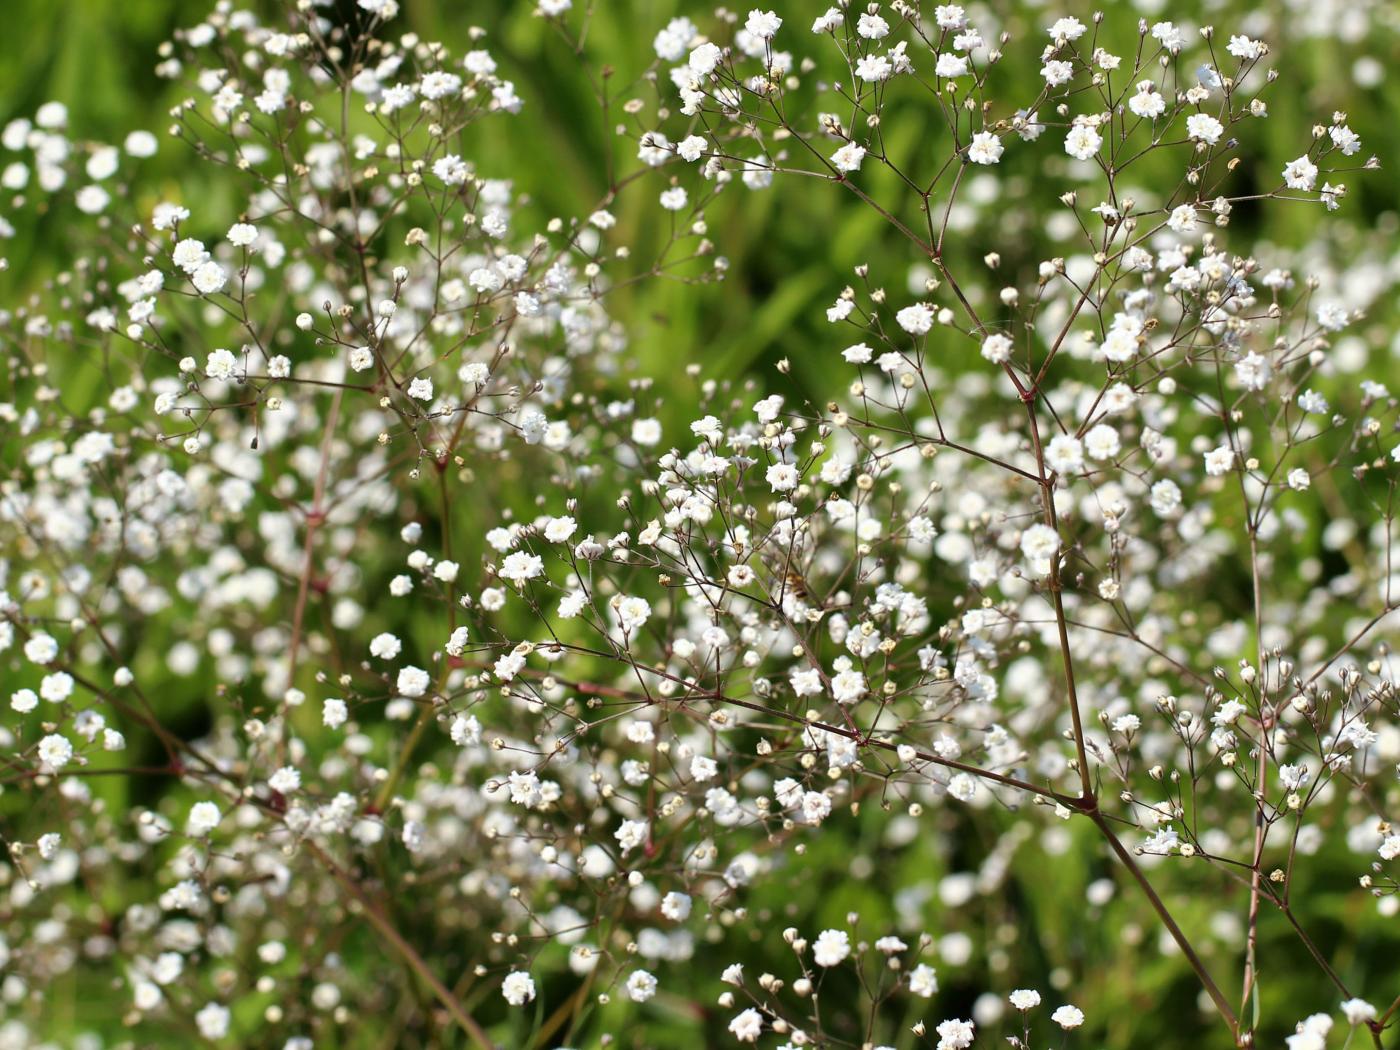 Tiny Flower Wallpaper with Baby's Breath Flower Wallpaper. Wallpaper Download. High Resolution Wallpaper